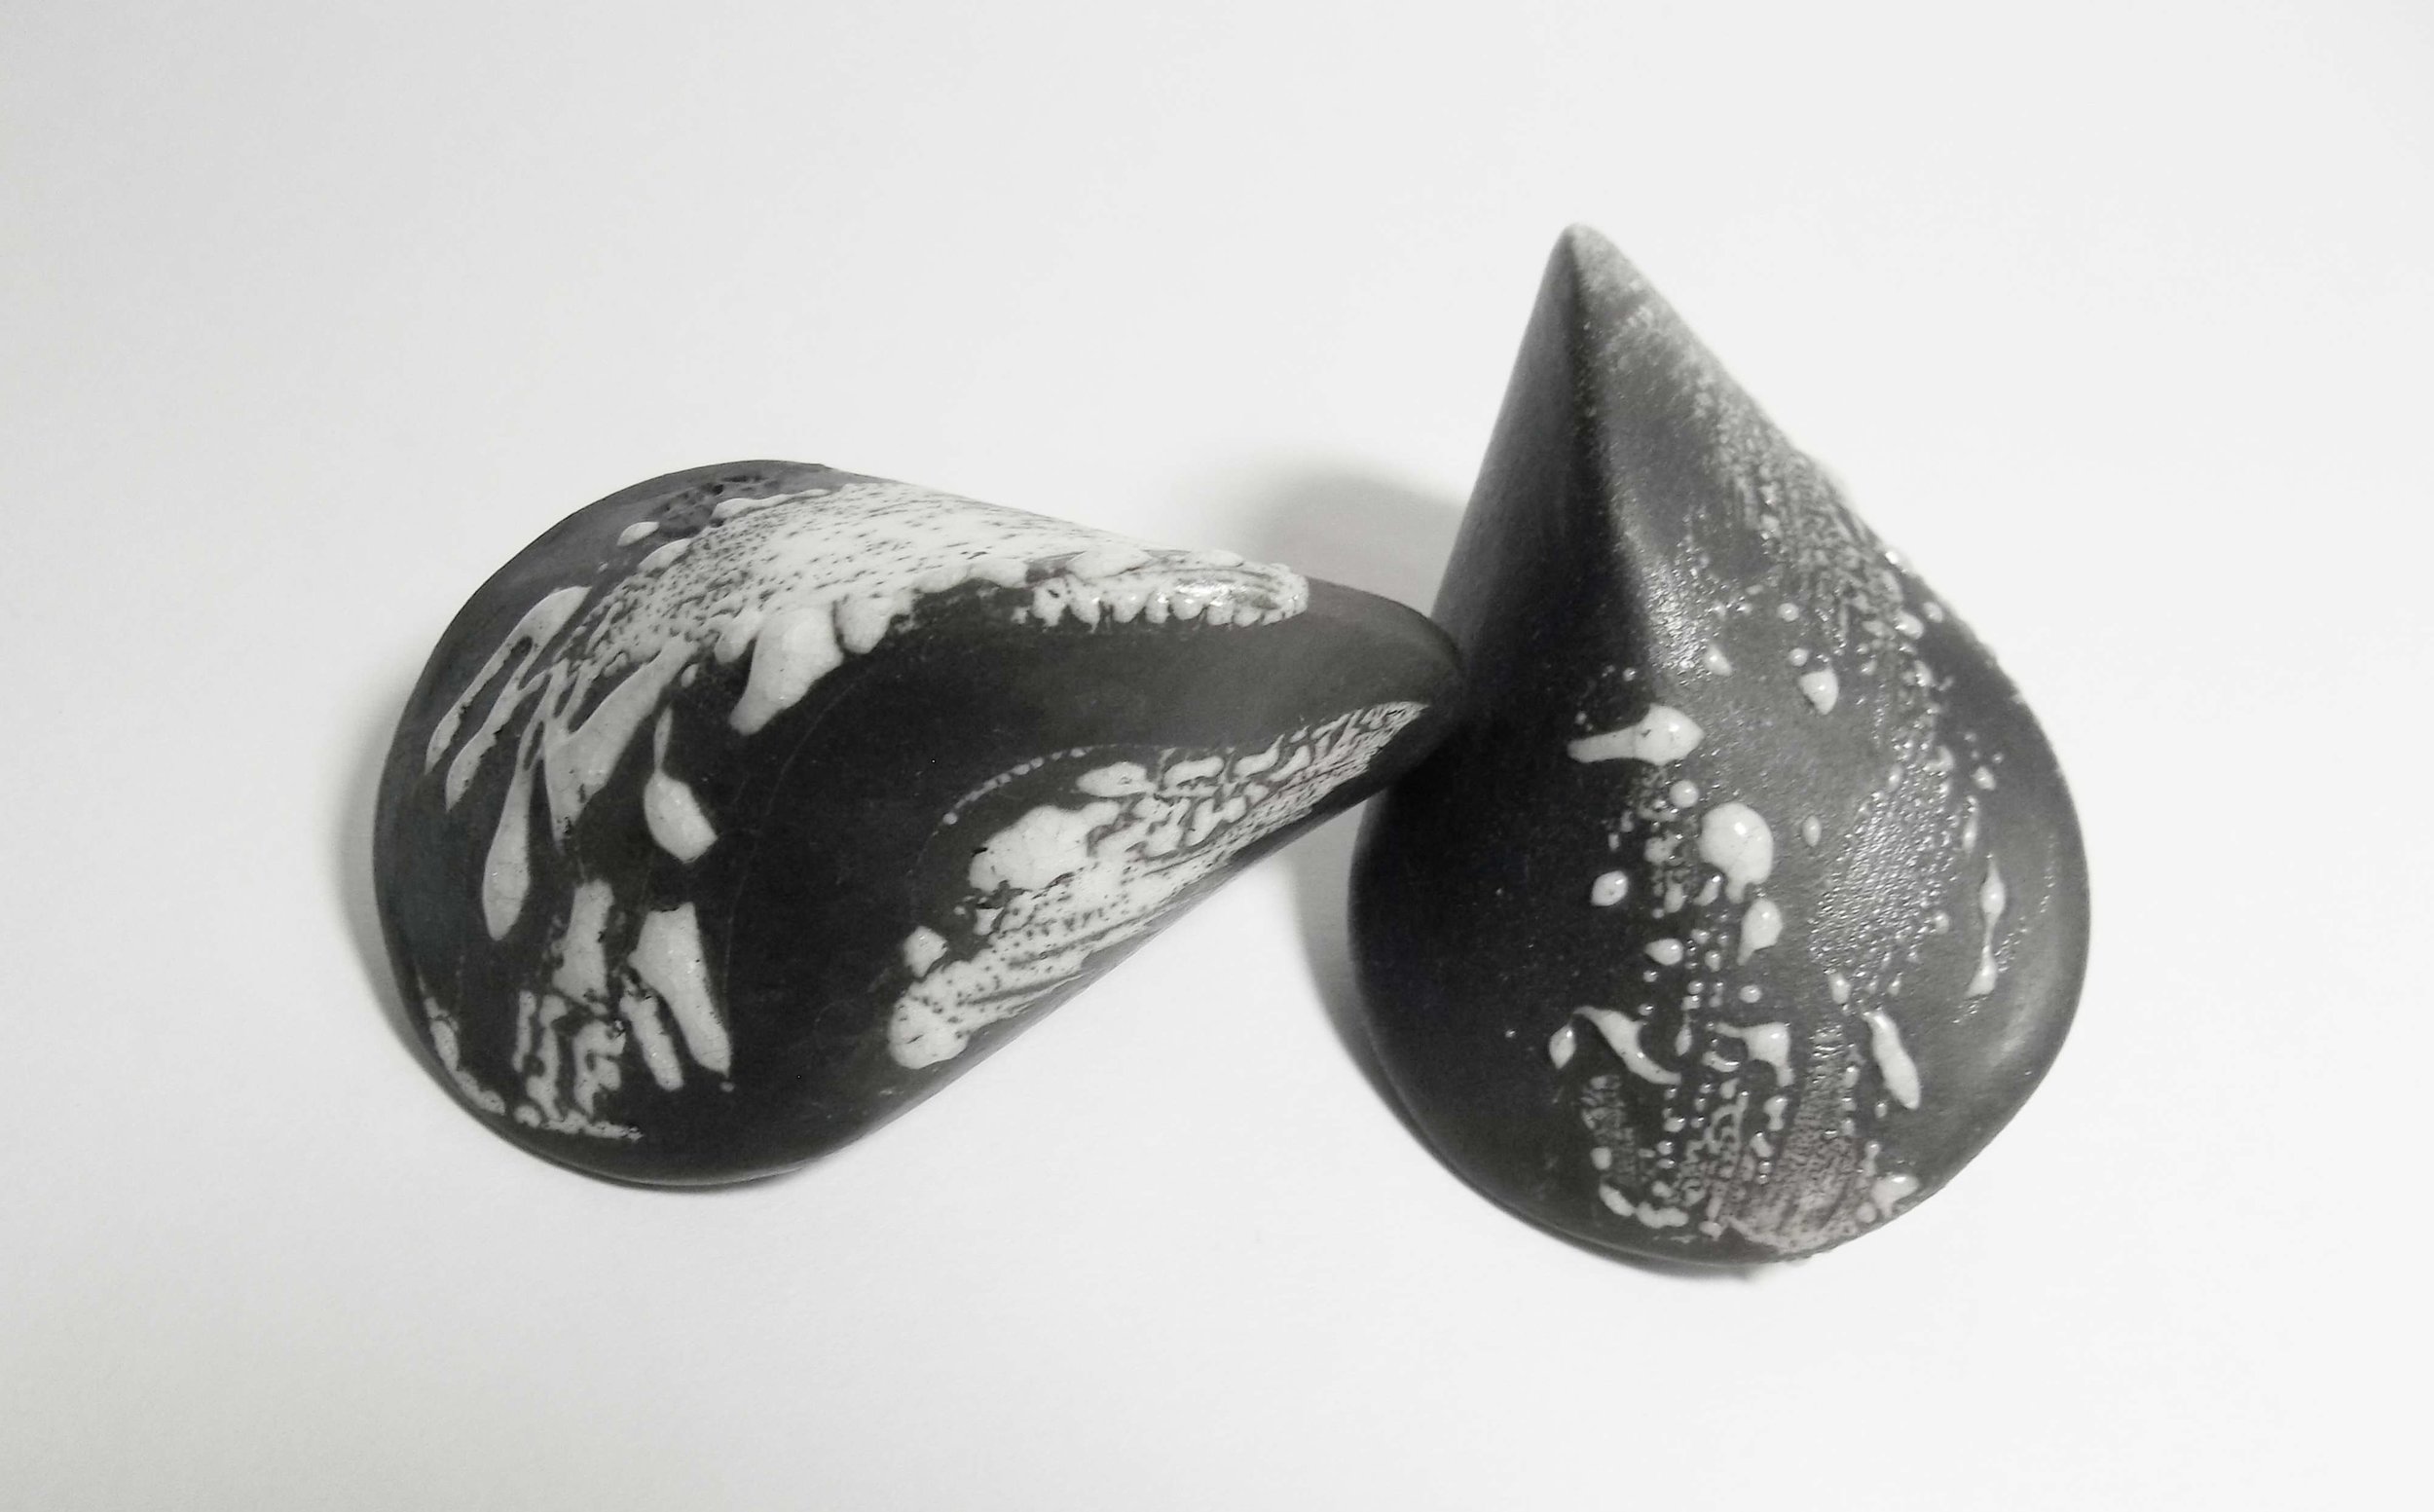 Titchy Black Mussels with Bead Glaze